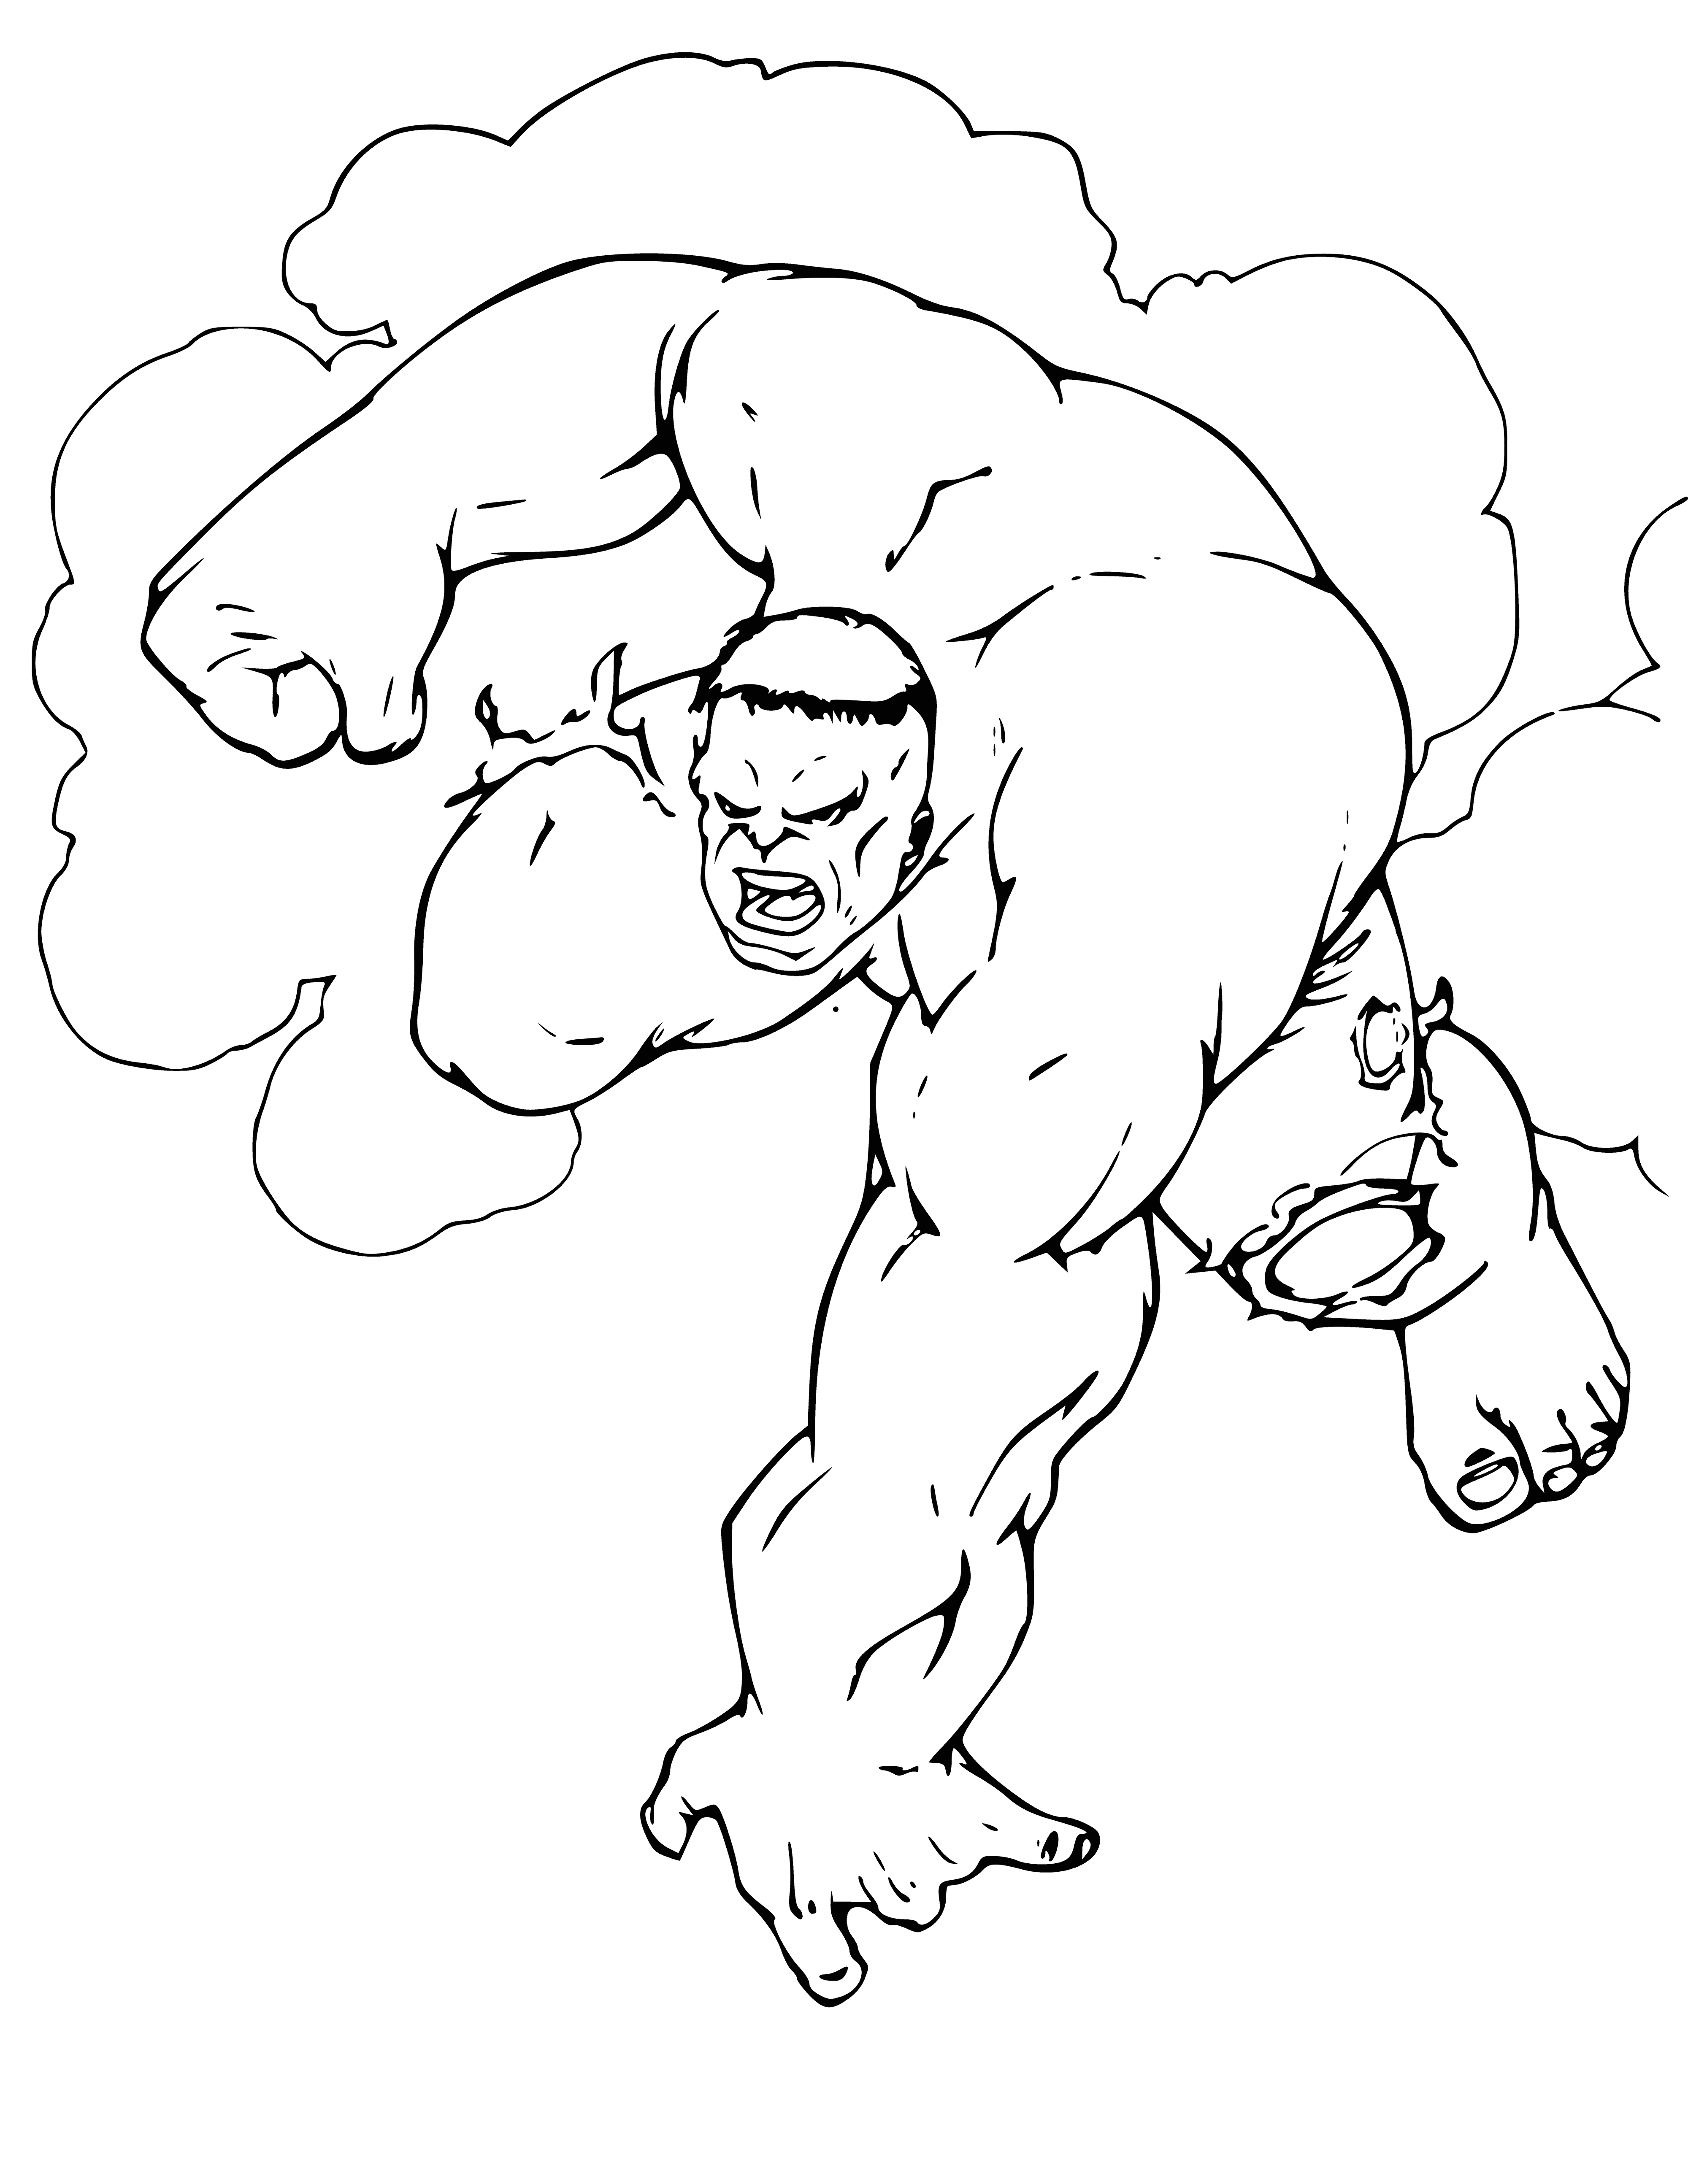 coloring page: The Hulk is a green-skinned superhuman with immense strength and no hair. Wears purple pants and has a gaping mouth of teeth.